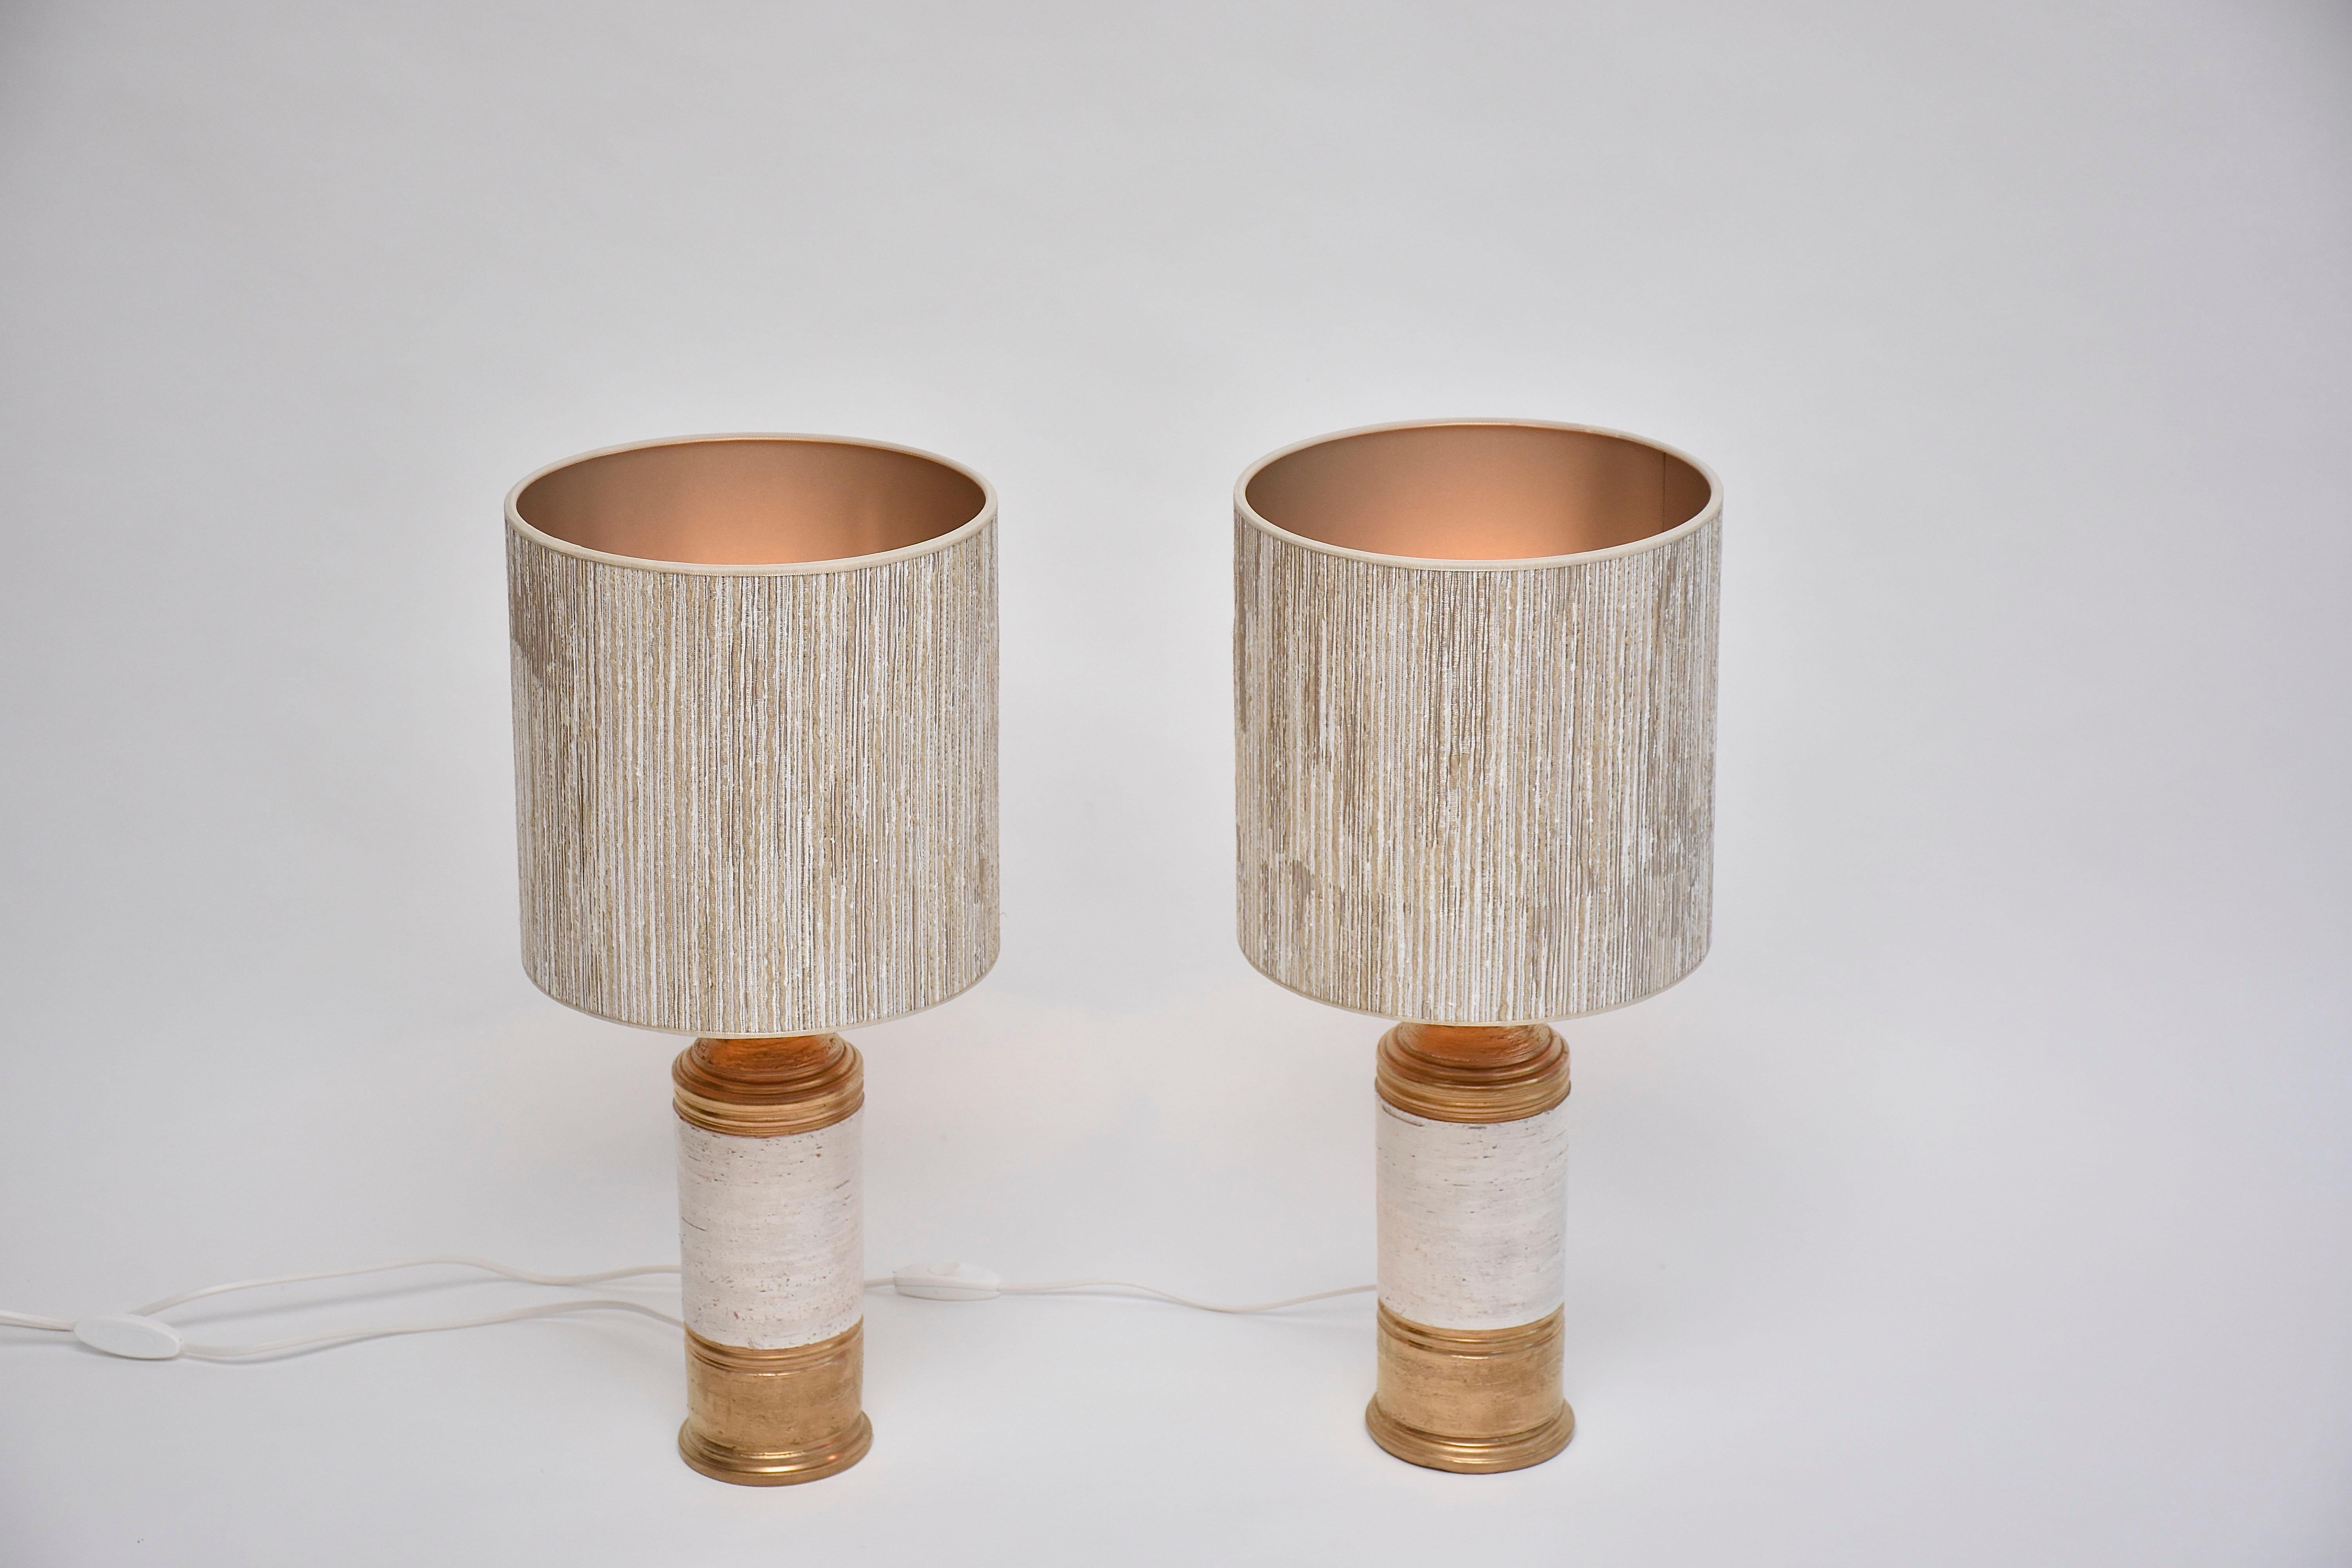 Beautiful pair ceramic table lamps designed by Bitossi for Bergboms- Sweden.
These pretty lamps have gold glazed base and top with in the centre off-white glazed 'birch' texture.
Period- ca. 1960
Place of origin- Italy/ Sweden
Labeled at the